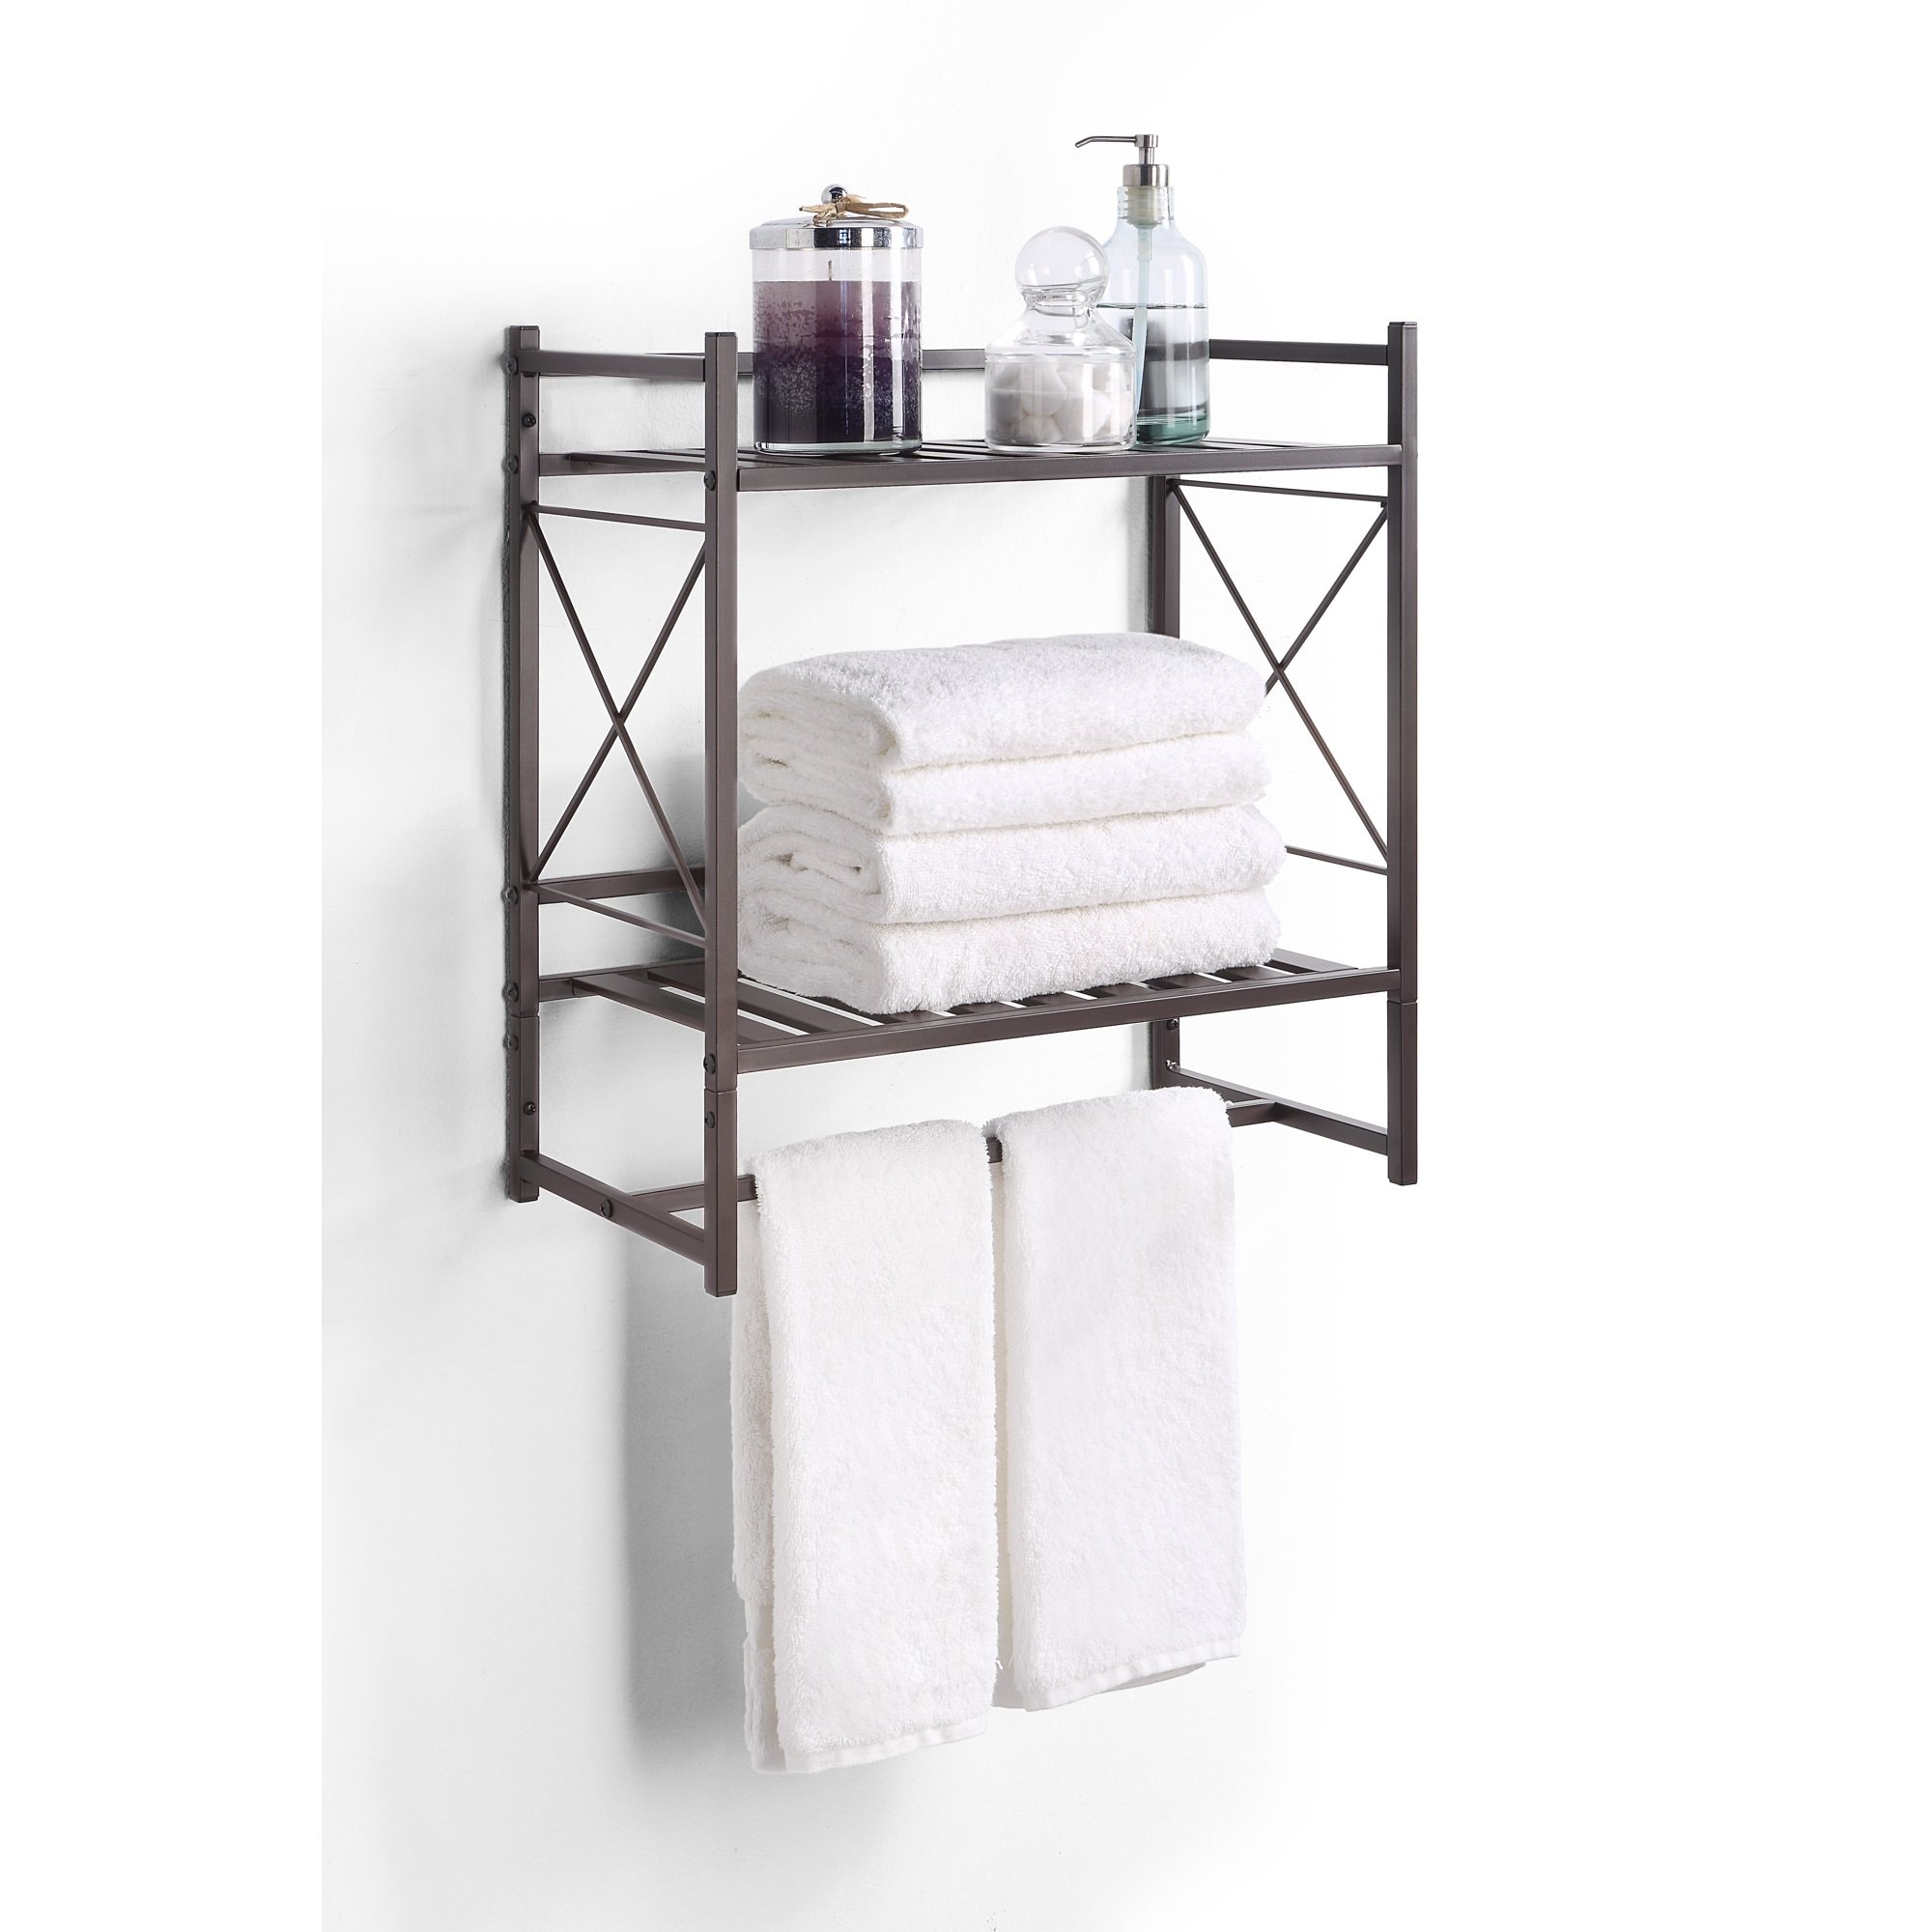 https://ak1.ostkcdn.com/images/products/is/images/direct/4a866de24c1feb3ec2915da0089f3cb6c360d1e1/2-Tier-Shelf-with-Towel-Bar-Wall-Mounted-Shower-Storage.jpg